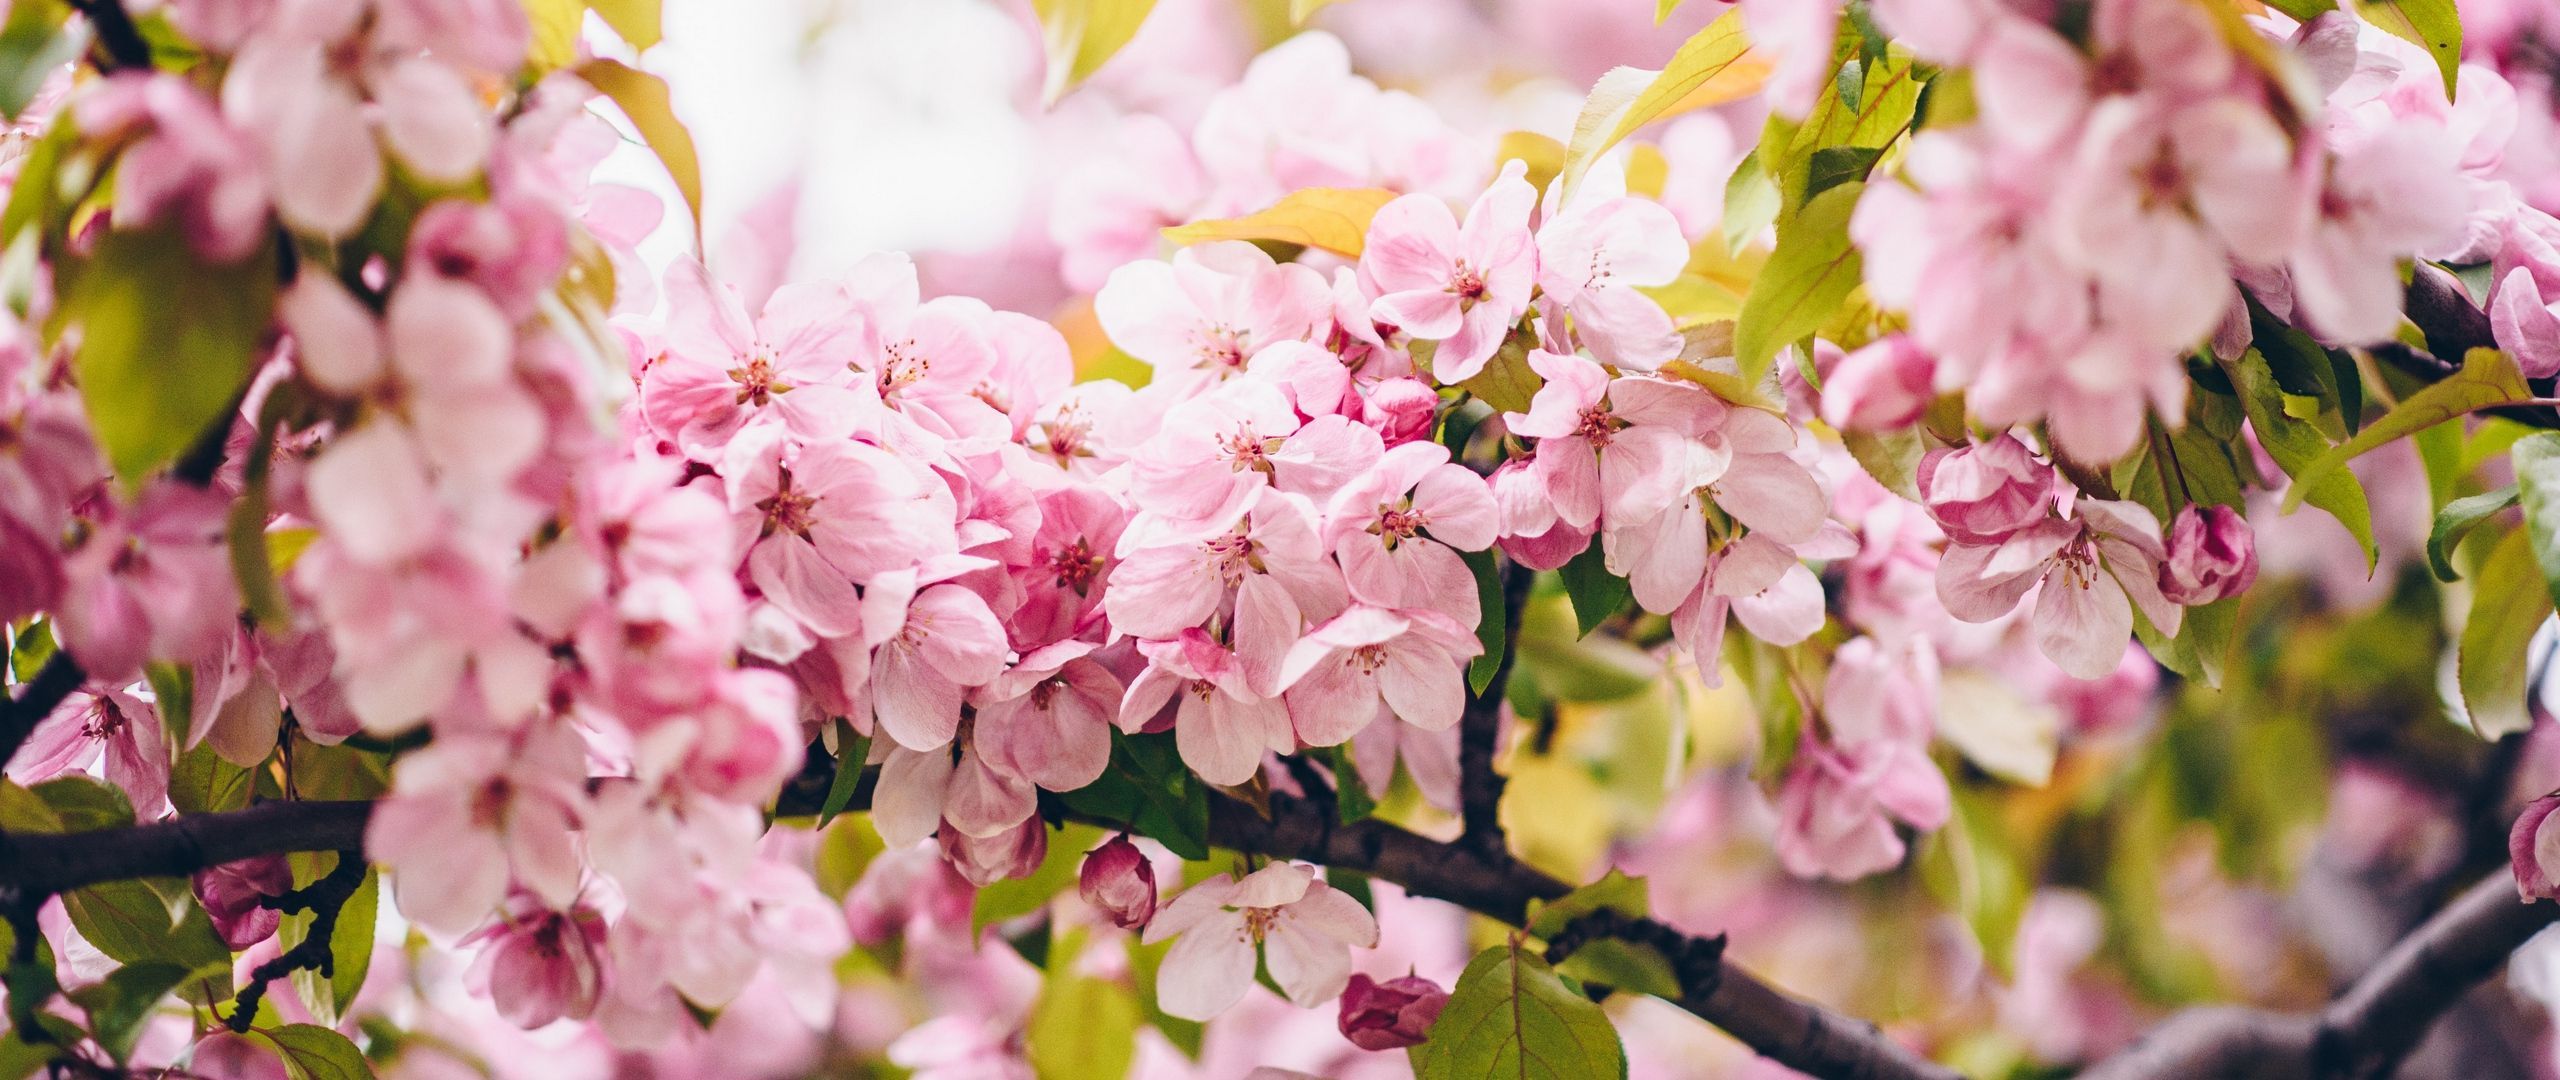 Download wallpaper 2560x1080 flowers, pink, branches, spring